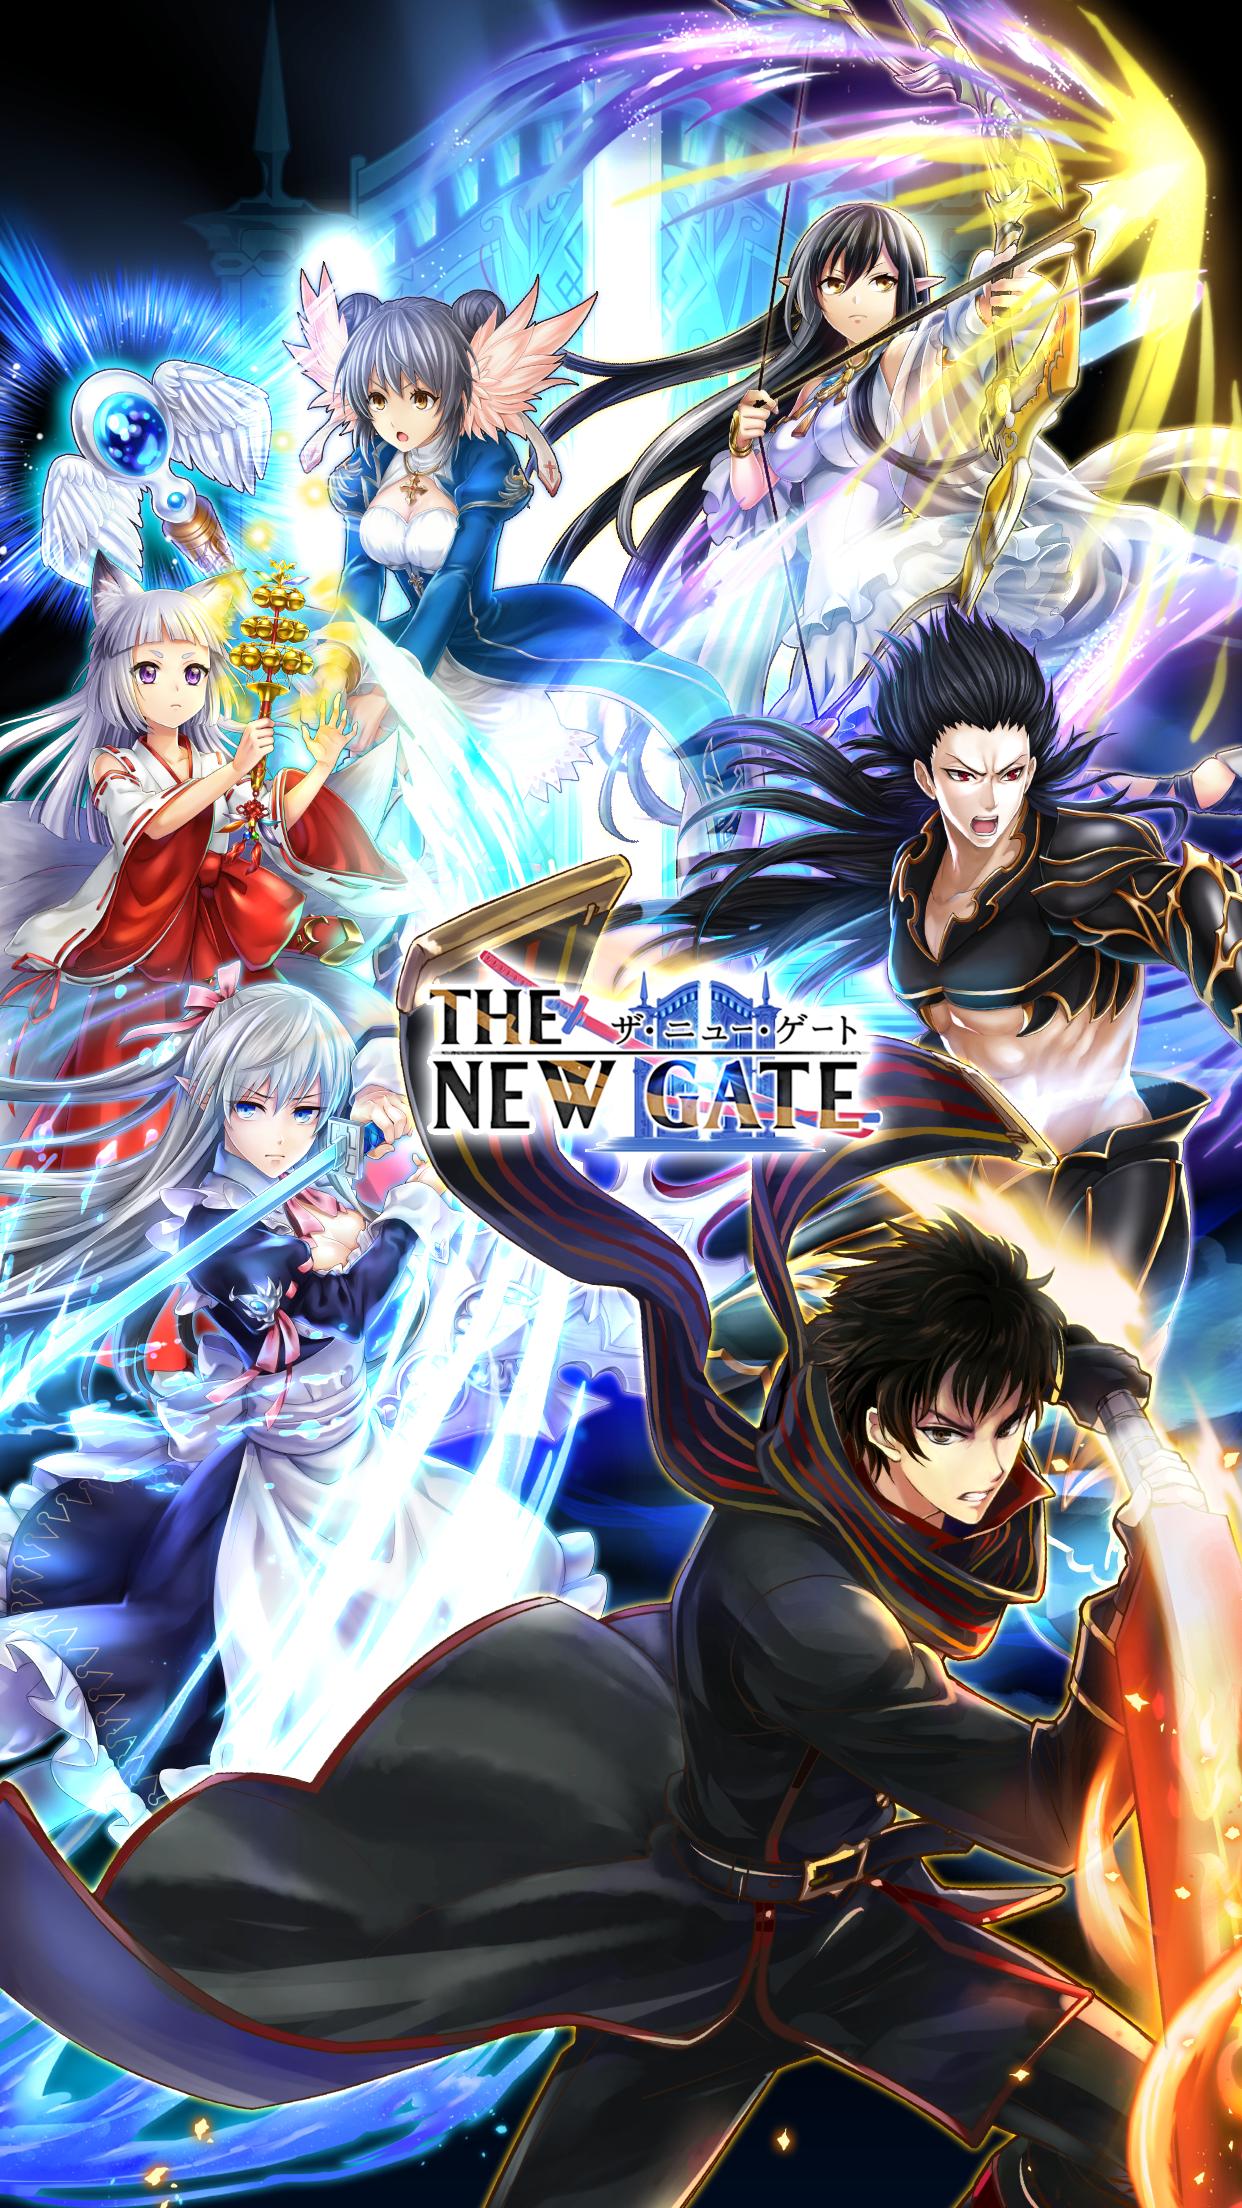 The New Gate ザ ニュー ゲート For Android Apk Download